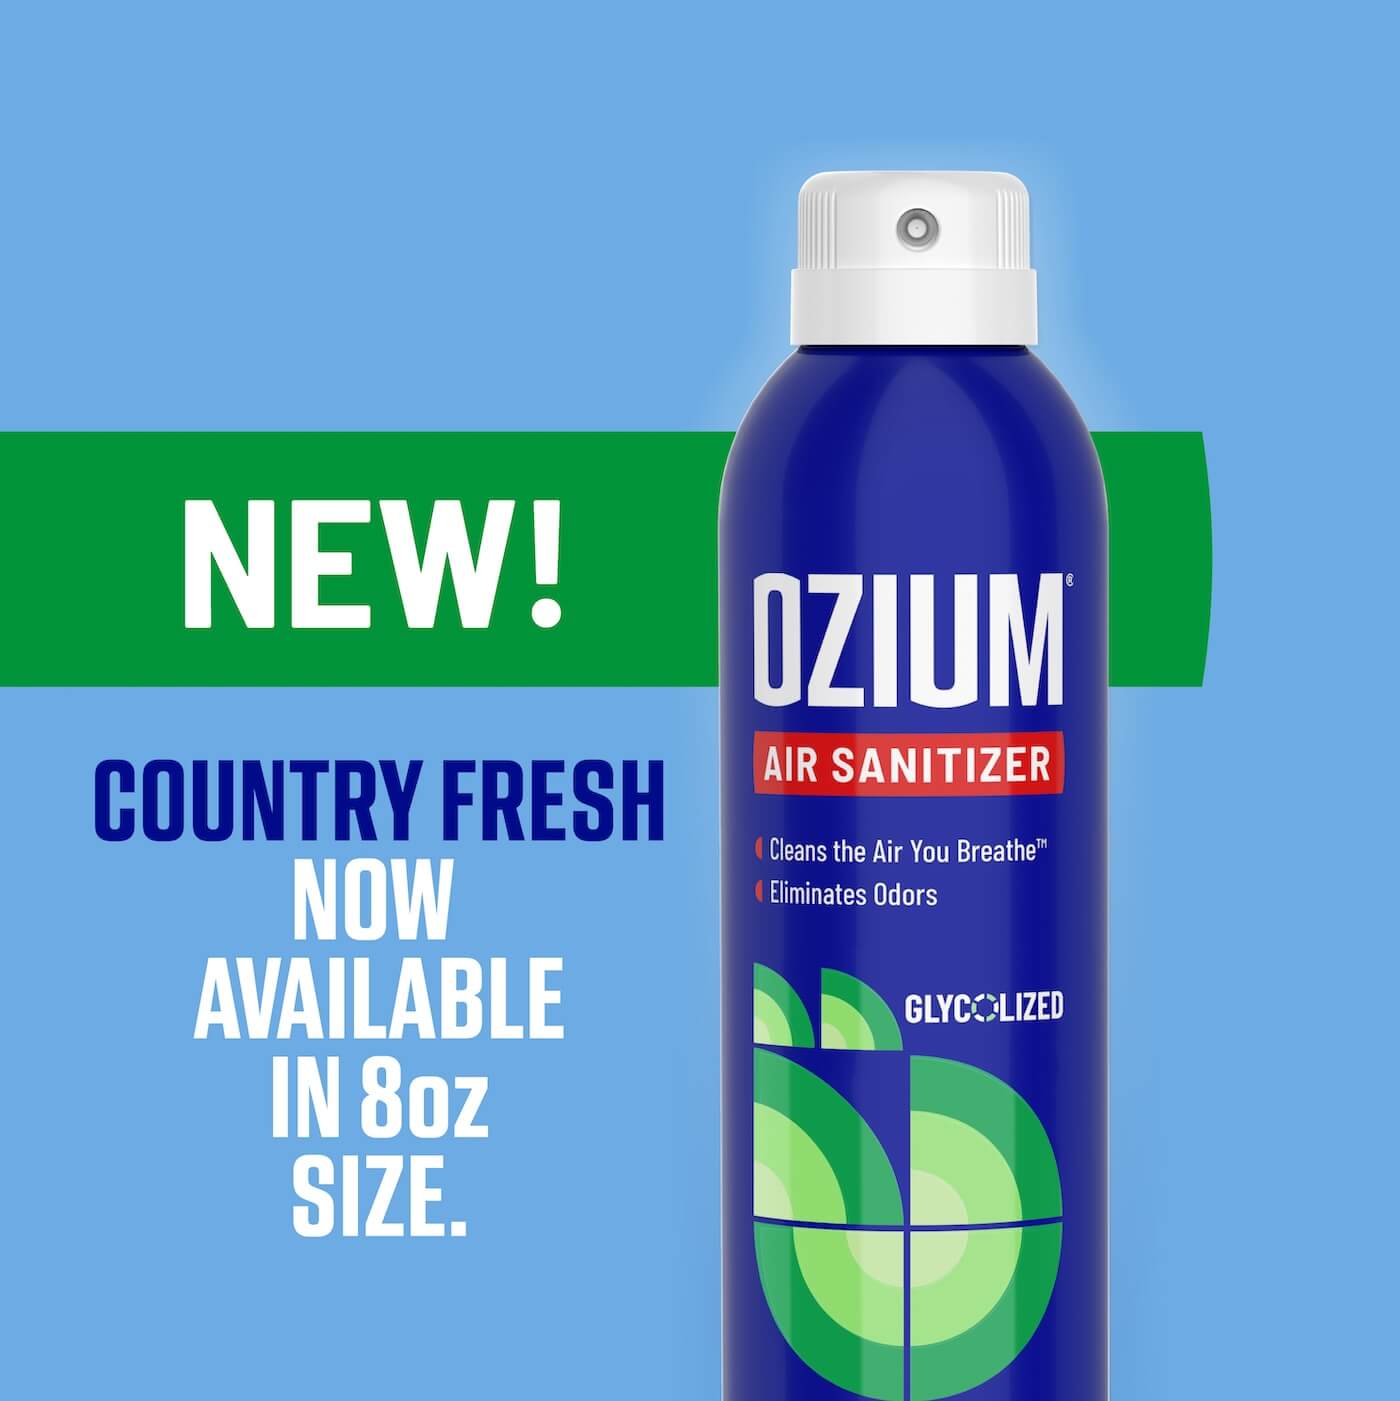 New! Country fresh now available in 8OZ size